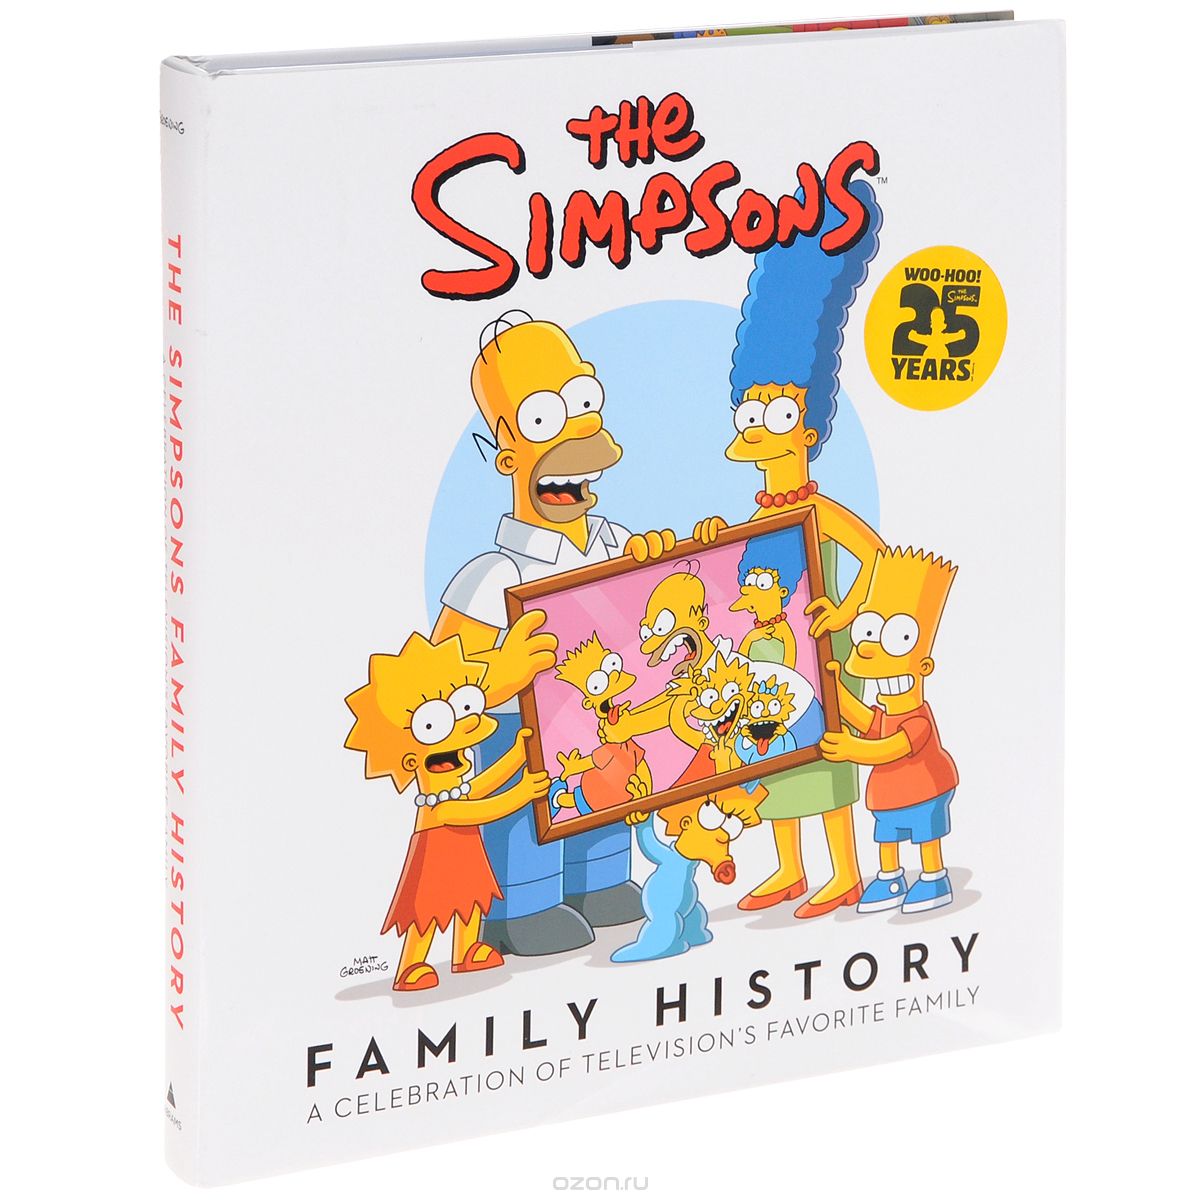 The Simpsons: Family History